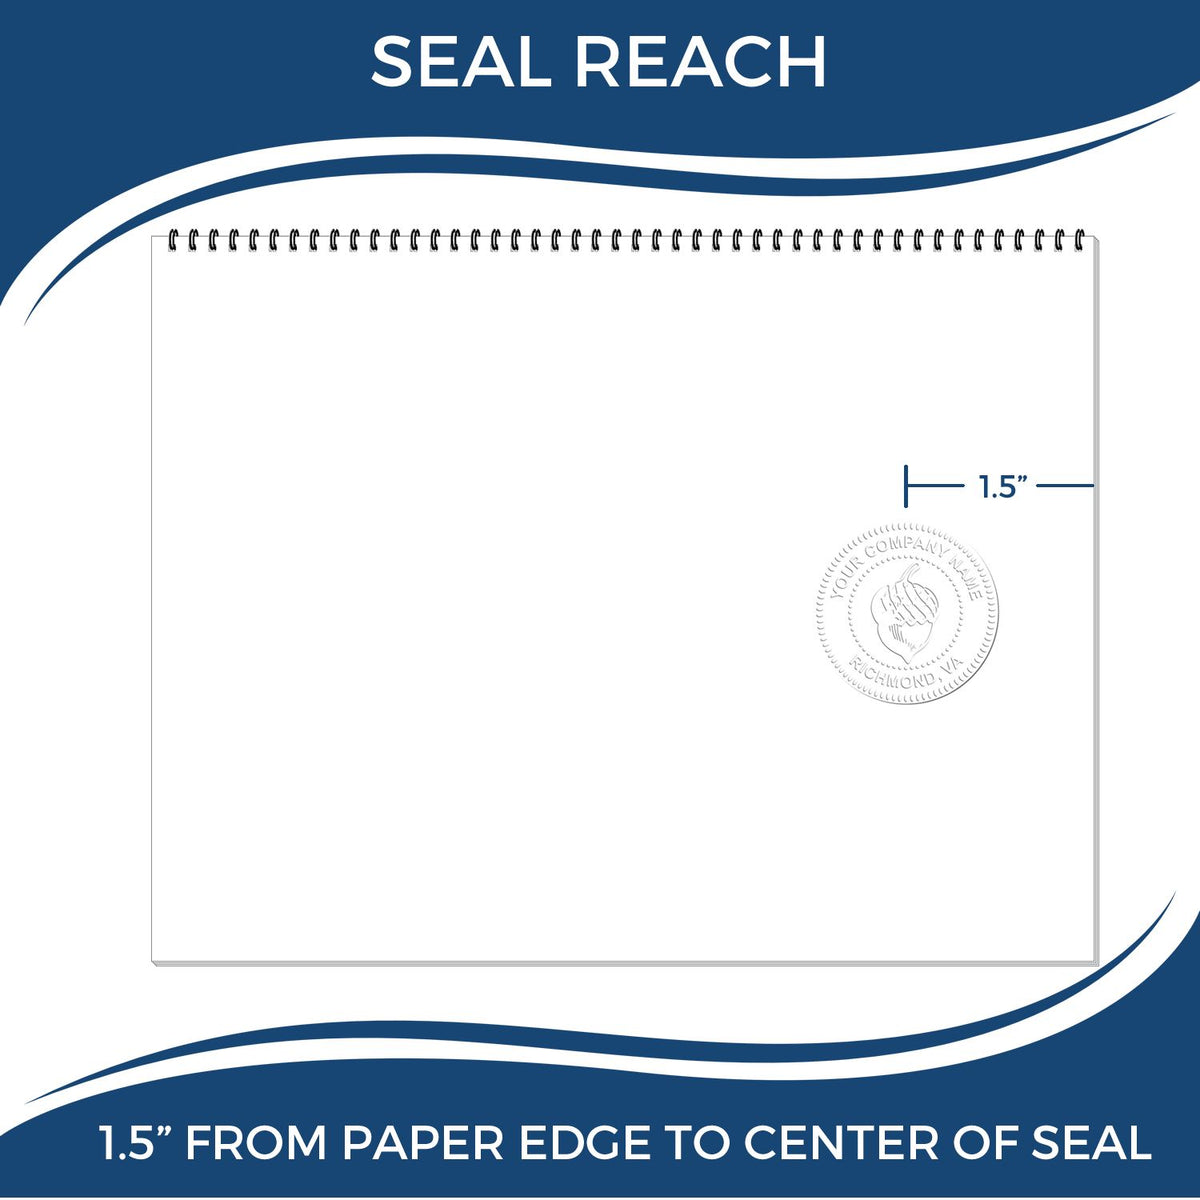 An infographic showing the seal reach which is represented by a ruler and a miniature seal image of the Handheld New York Professional Engineer Embosser